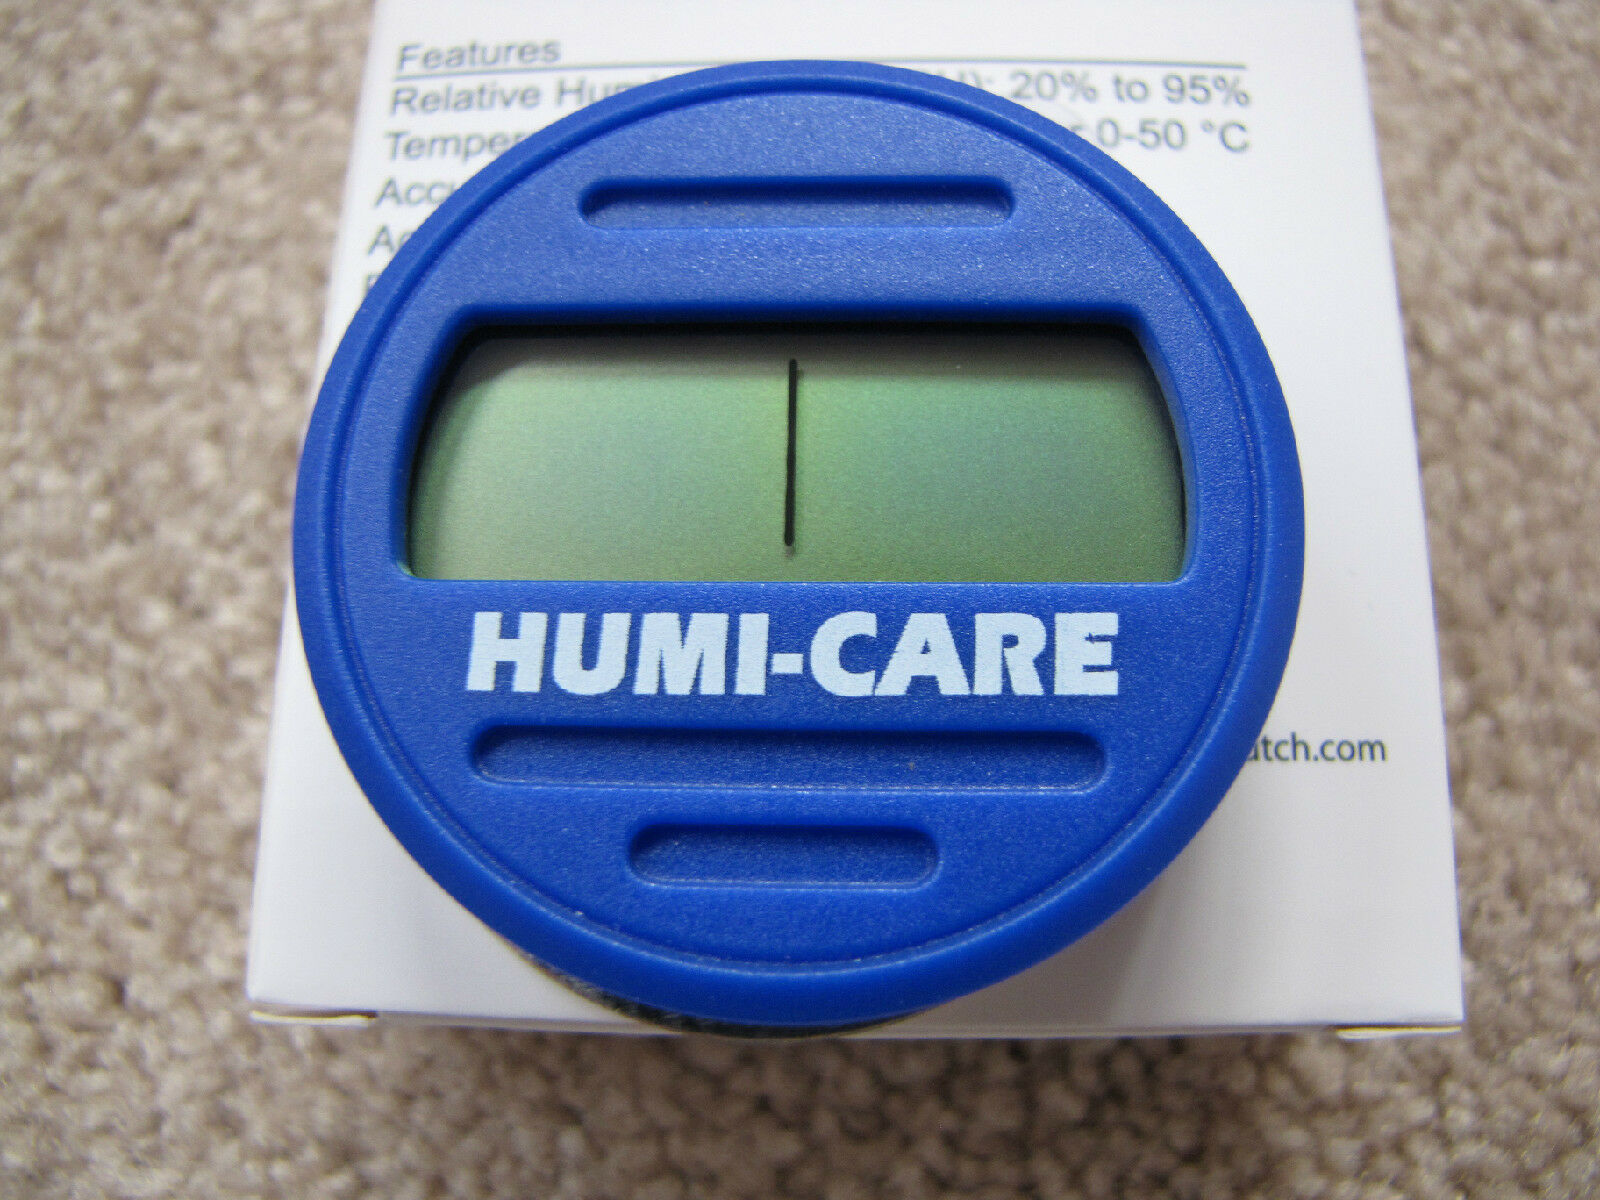 Humi-Care Blue Round Digital Hygrometer for Cigar Humidors - New